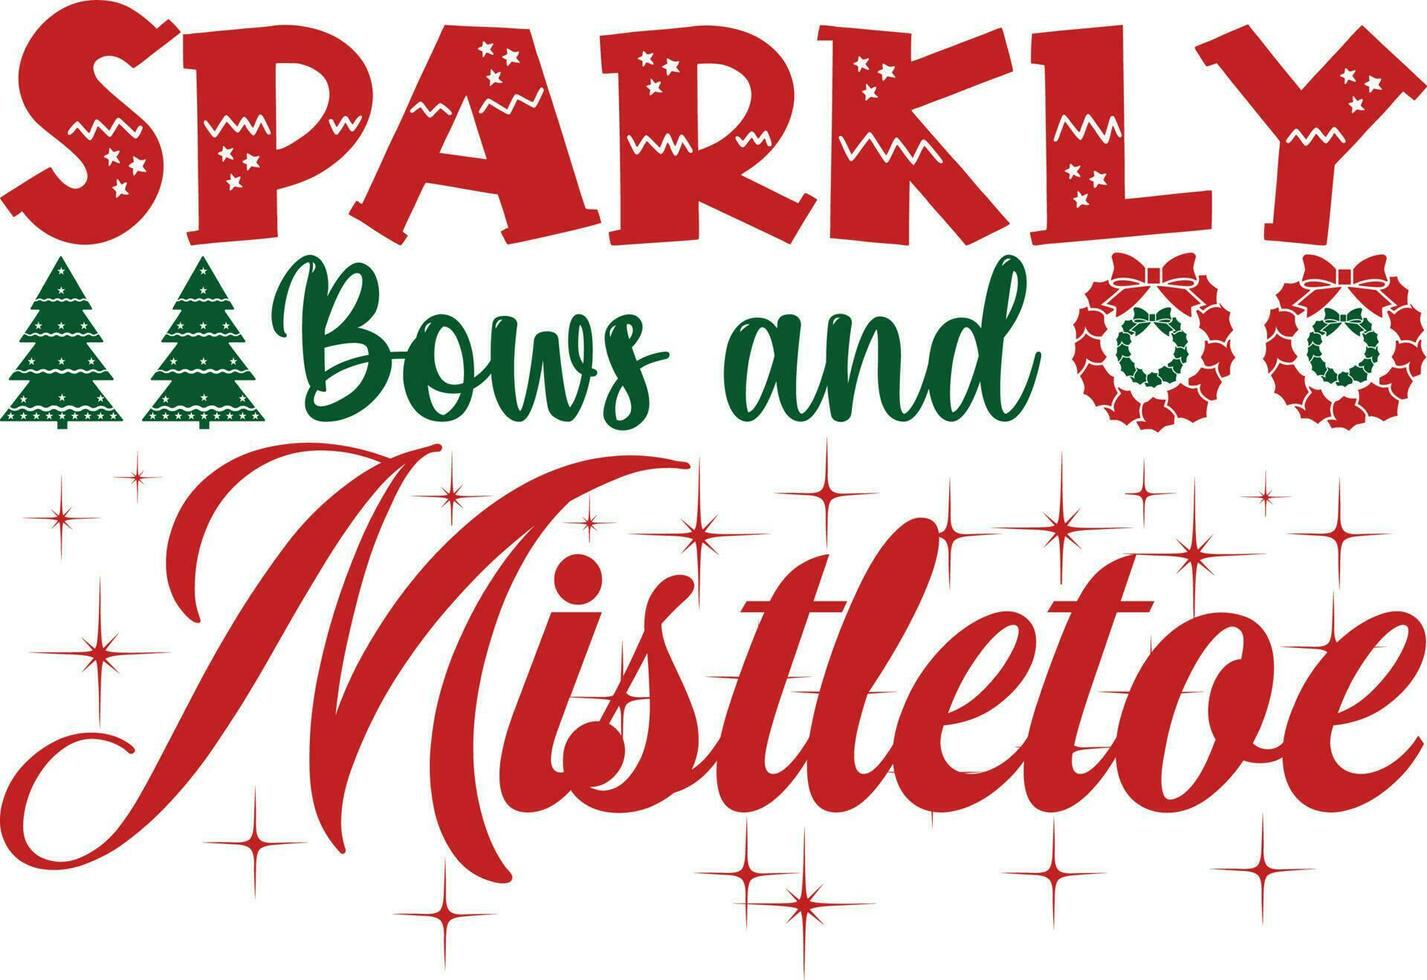 Sparkly Bows and Mistletoe T-shirt Design vector